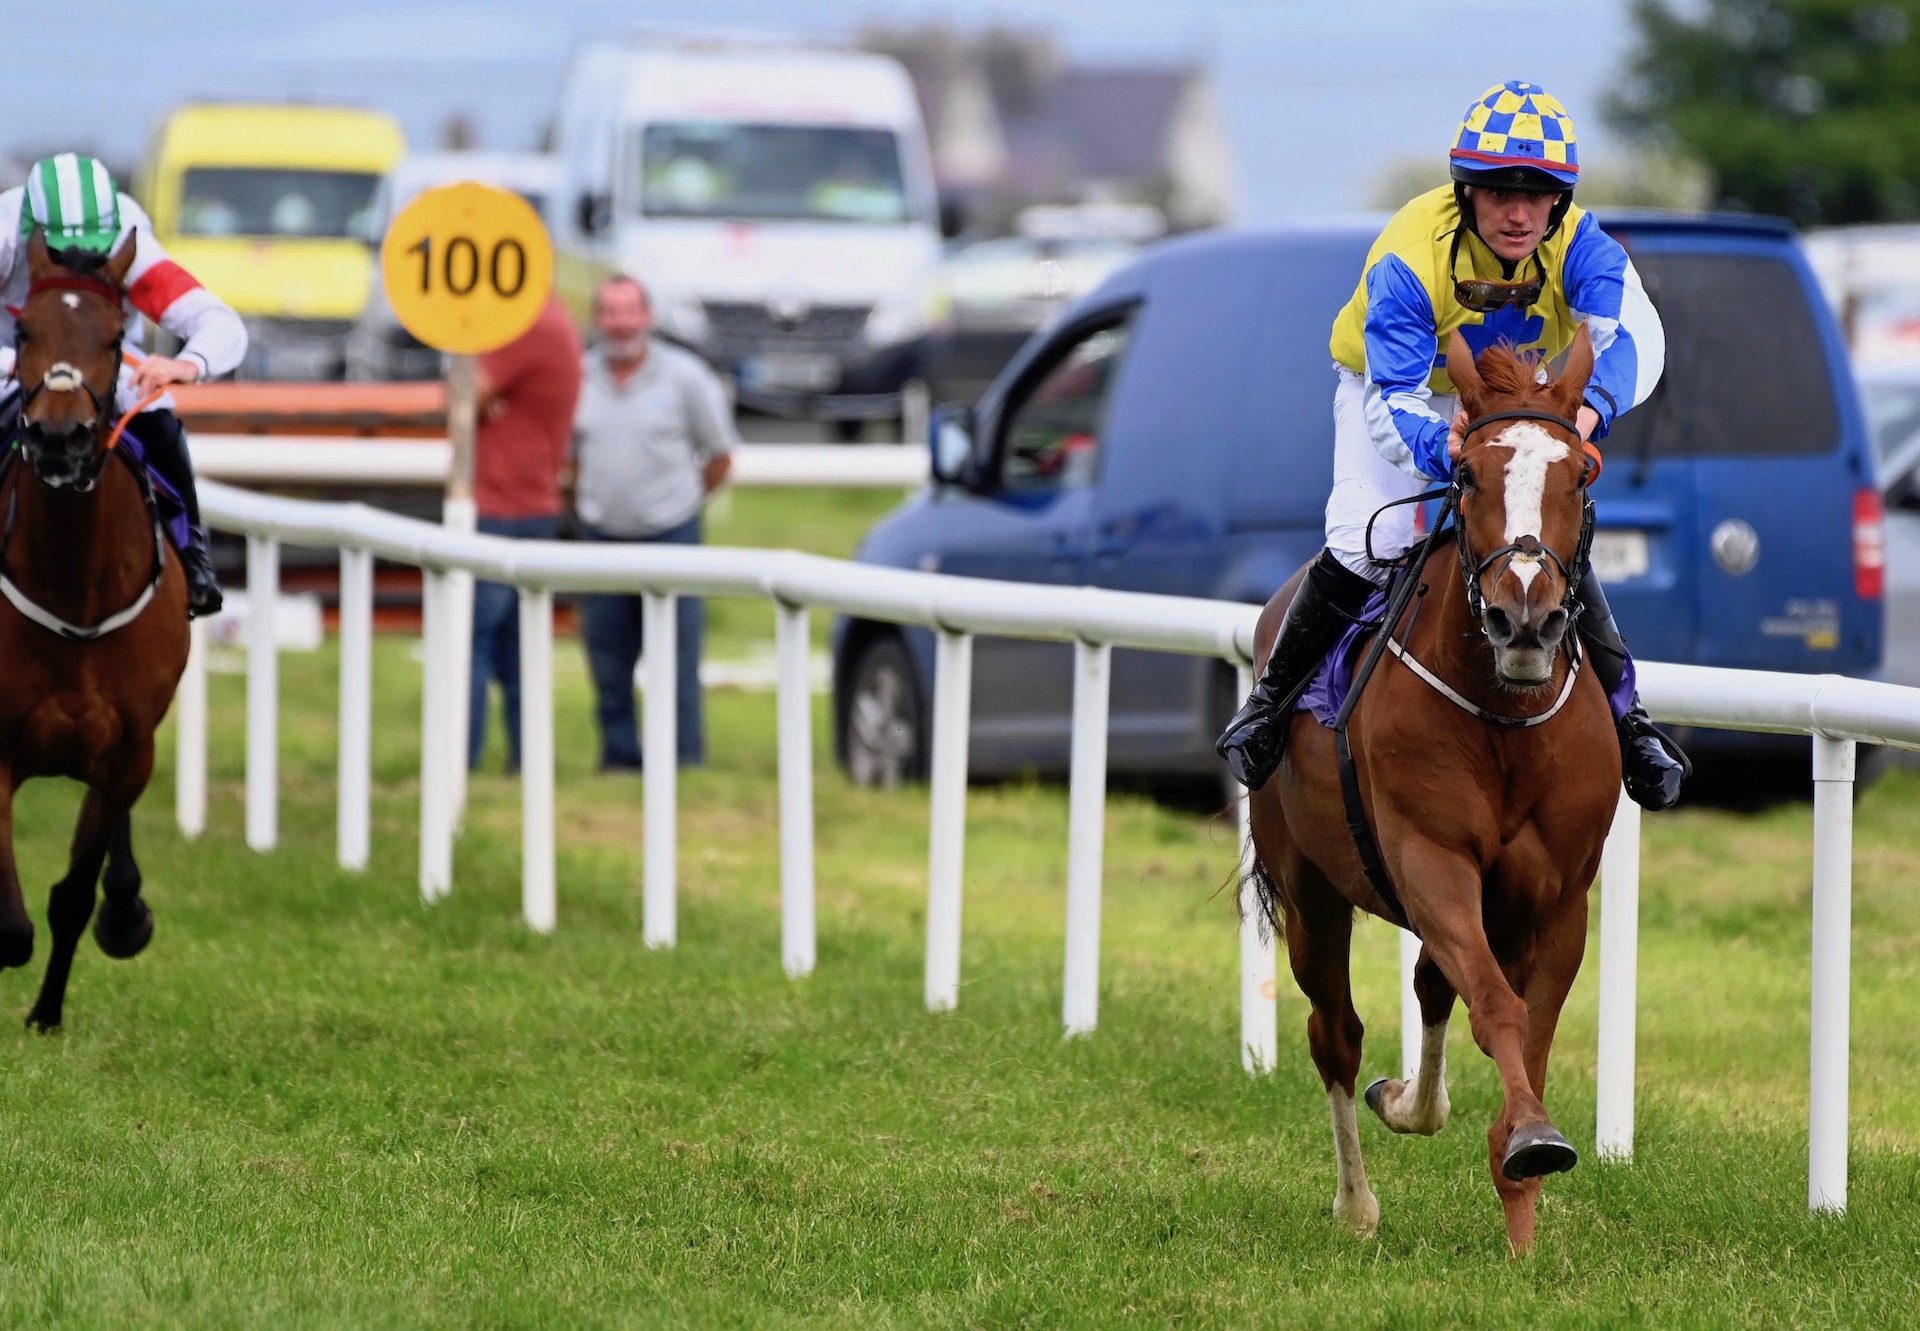 World Of Fortunes (Soldier Of Fortune) Wins The Mares Bumper At Wexford